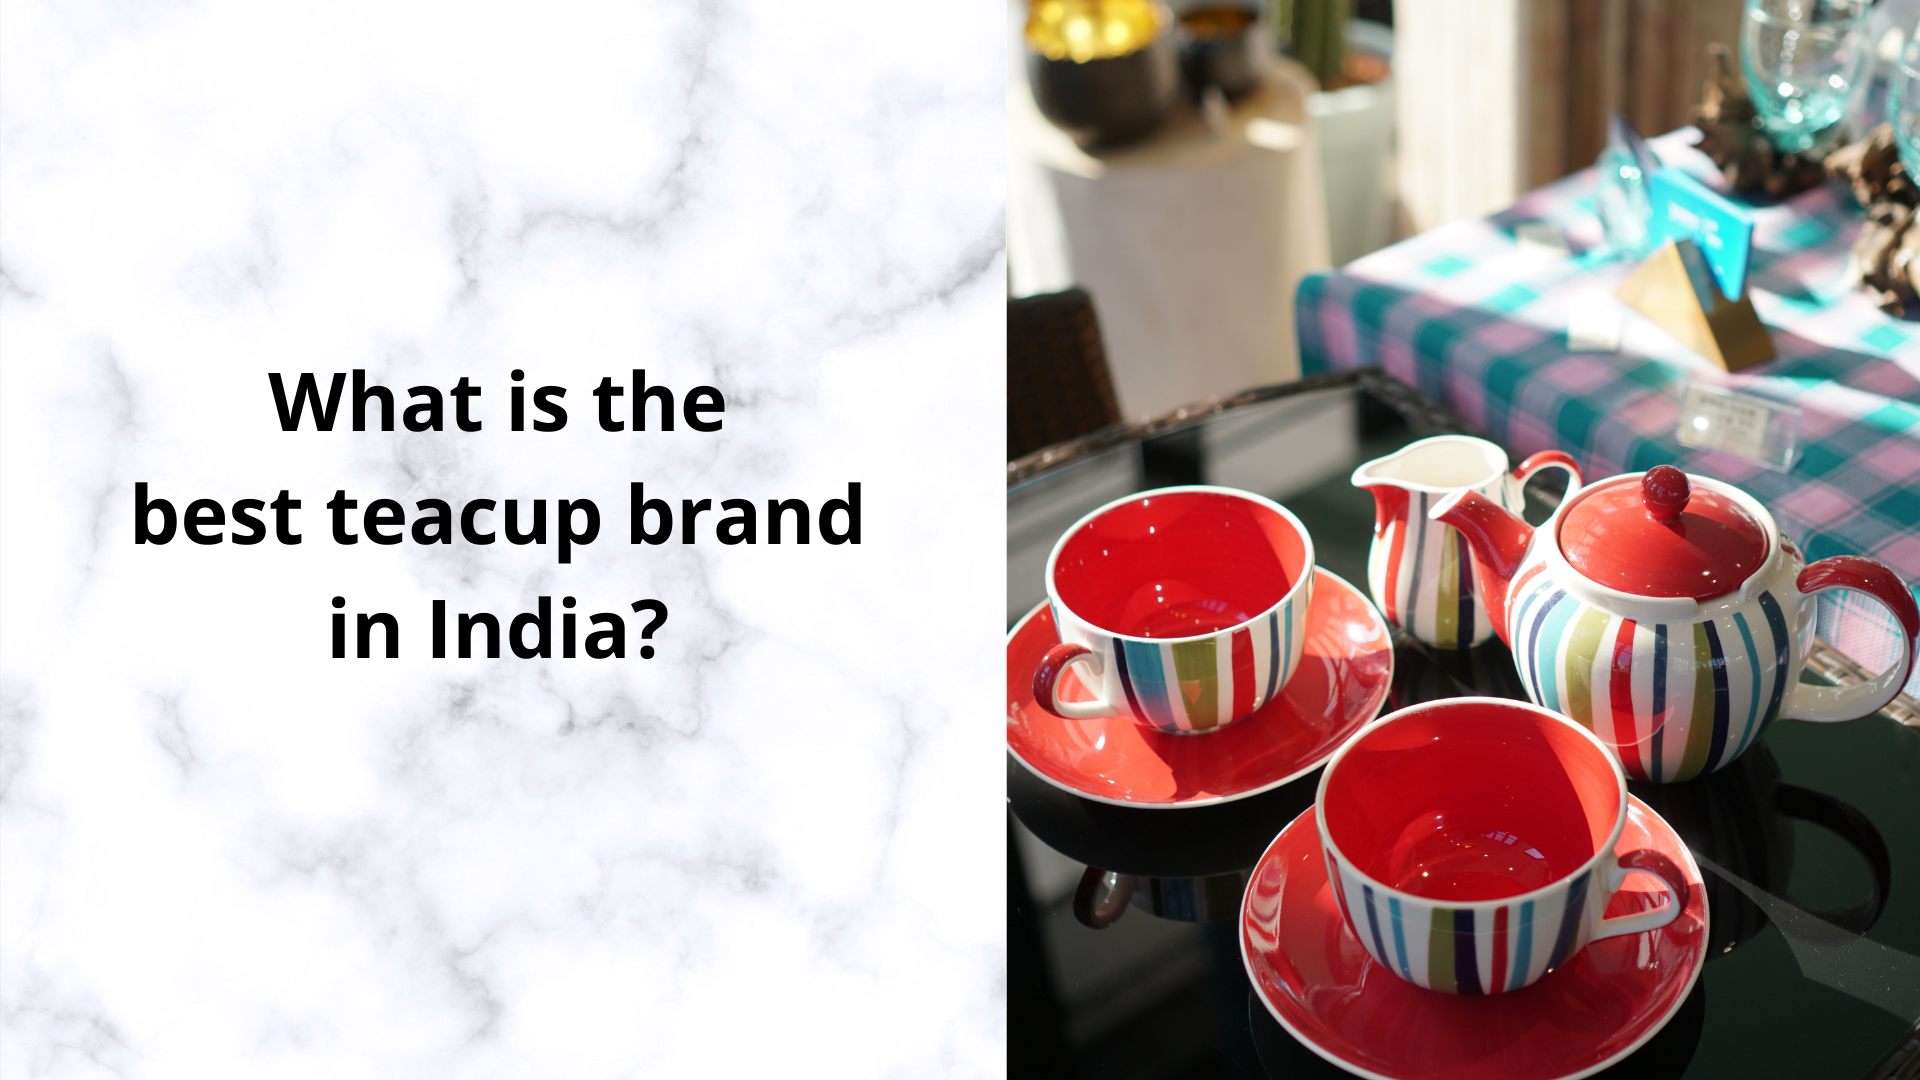 What is the best teacup brand in India